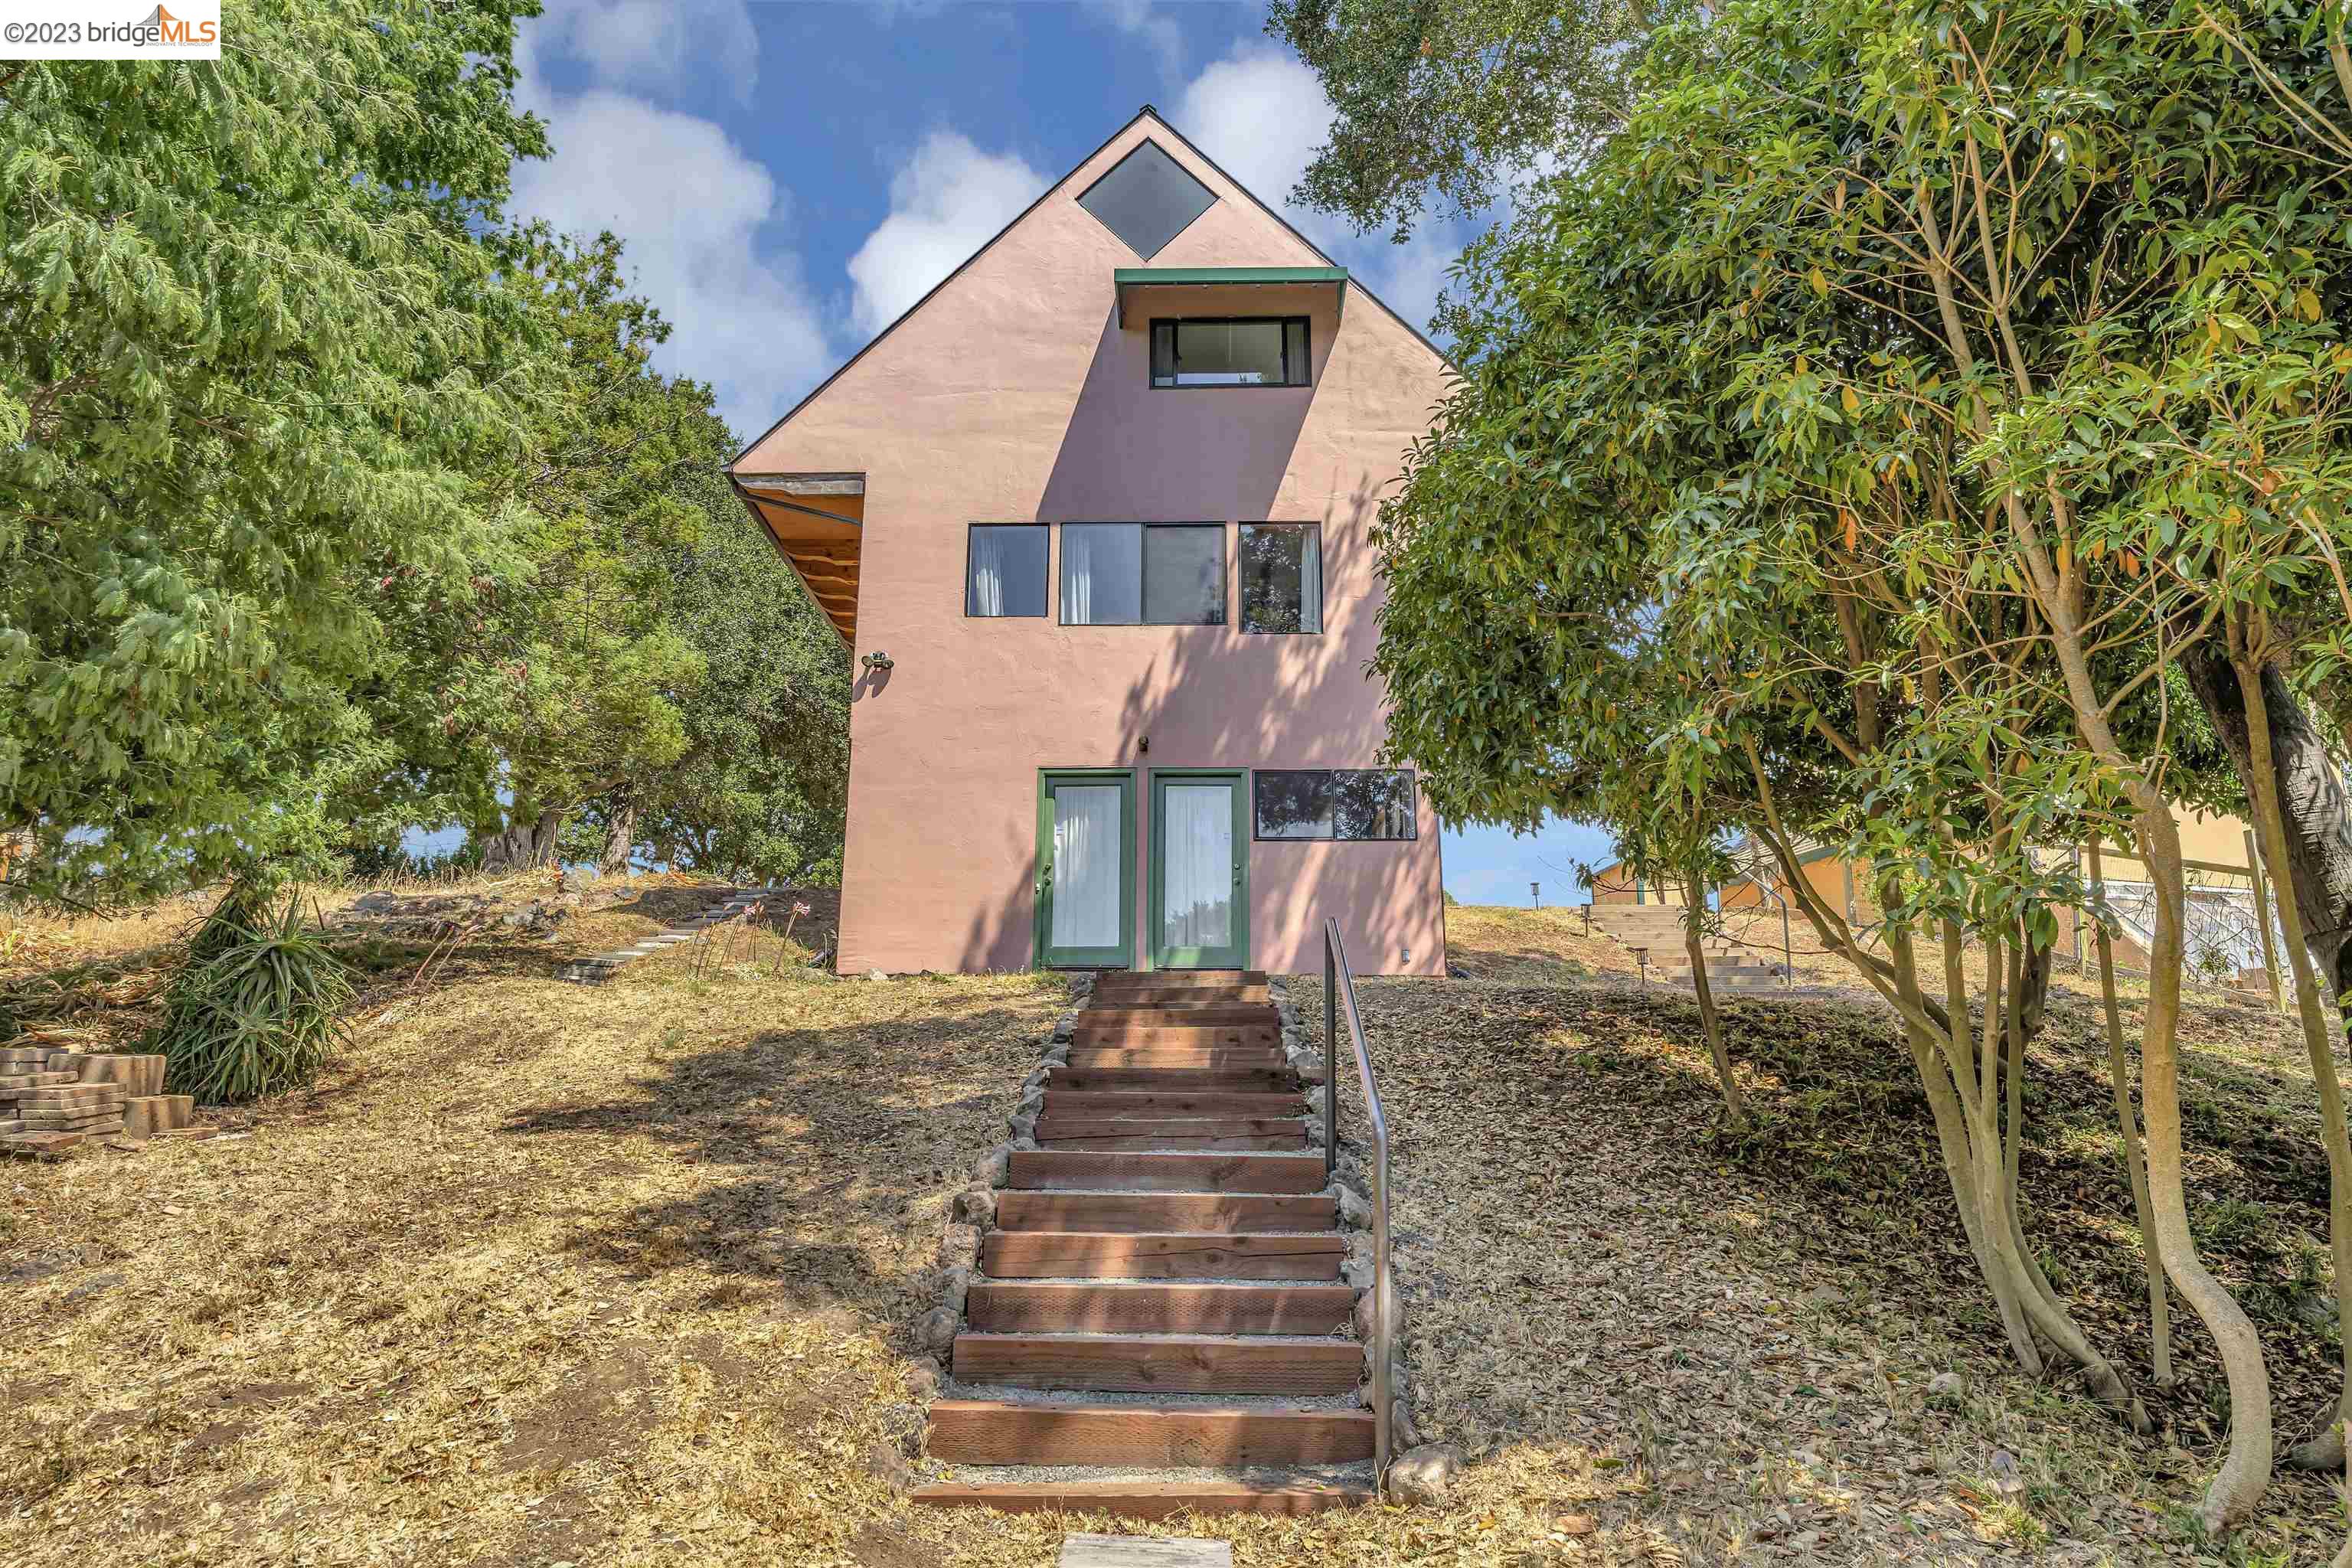 This unique, light-filled architect designed contemporary home on three levels was built in 1992. The top two levels have totally open floor plans, taking advantage of the incredible views of Wildcat Canyon Regional Park. The 6,600 square feet lot backs up to vacant land that backs up to the park, virtually making the park the backyard to this home. Newer flooring and other recent improvements have been made to the home. The main level has the kitchen and a huge open room. The upstairs has a huge open room, the main tiled bathroom with a skylight, closet, a loft and a fantastic view of the park. The downstairs was developed after the home was built with a large room, bathroom and kitchenette which is not reflected in the public record.The square footage is estimated from the floor plan from the photographer. There is also a laundry/utility room downstairs. The home, set back from the street, features an older two-car garage and a shed. ADU potential downstairs and/or garage. This is a super tranquil setting for the buyer looking for something very special.